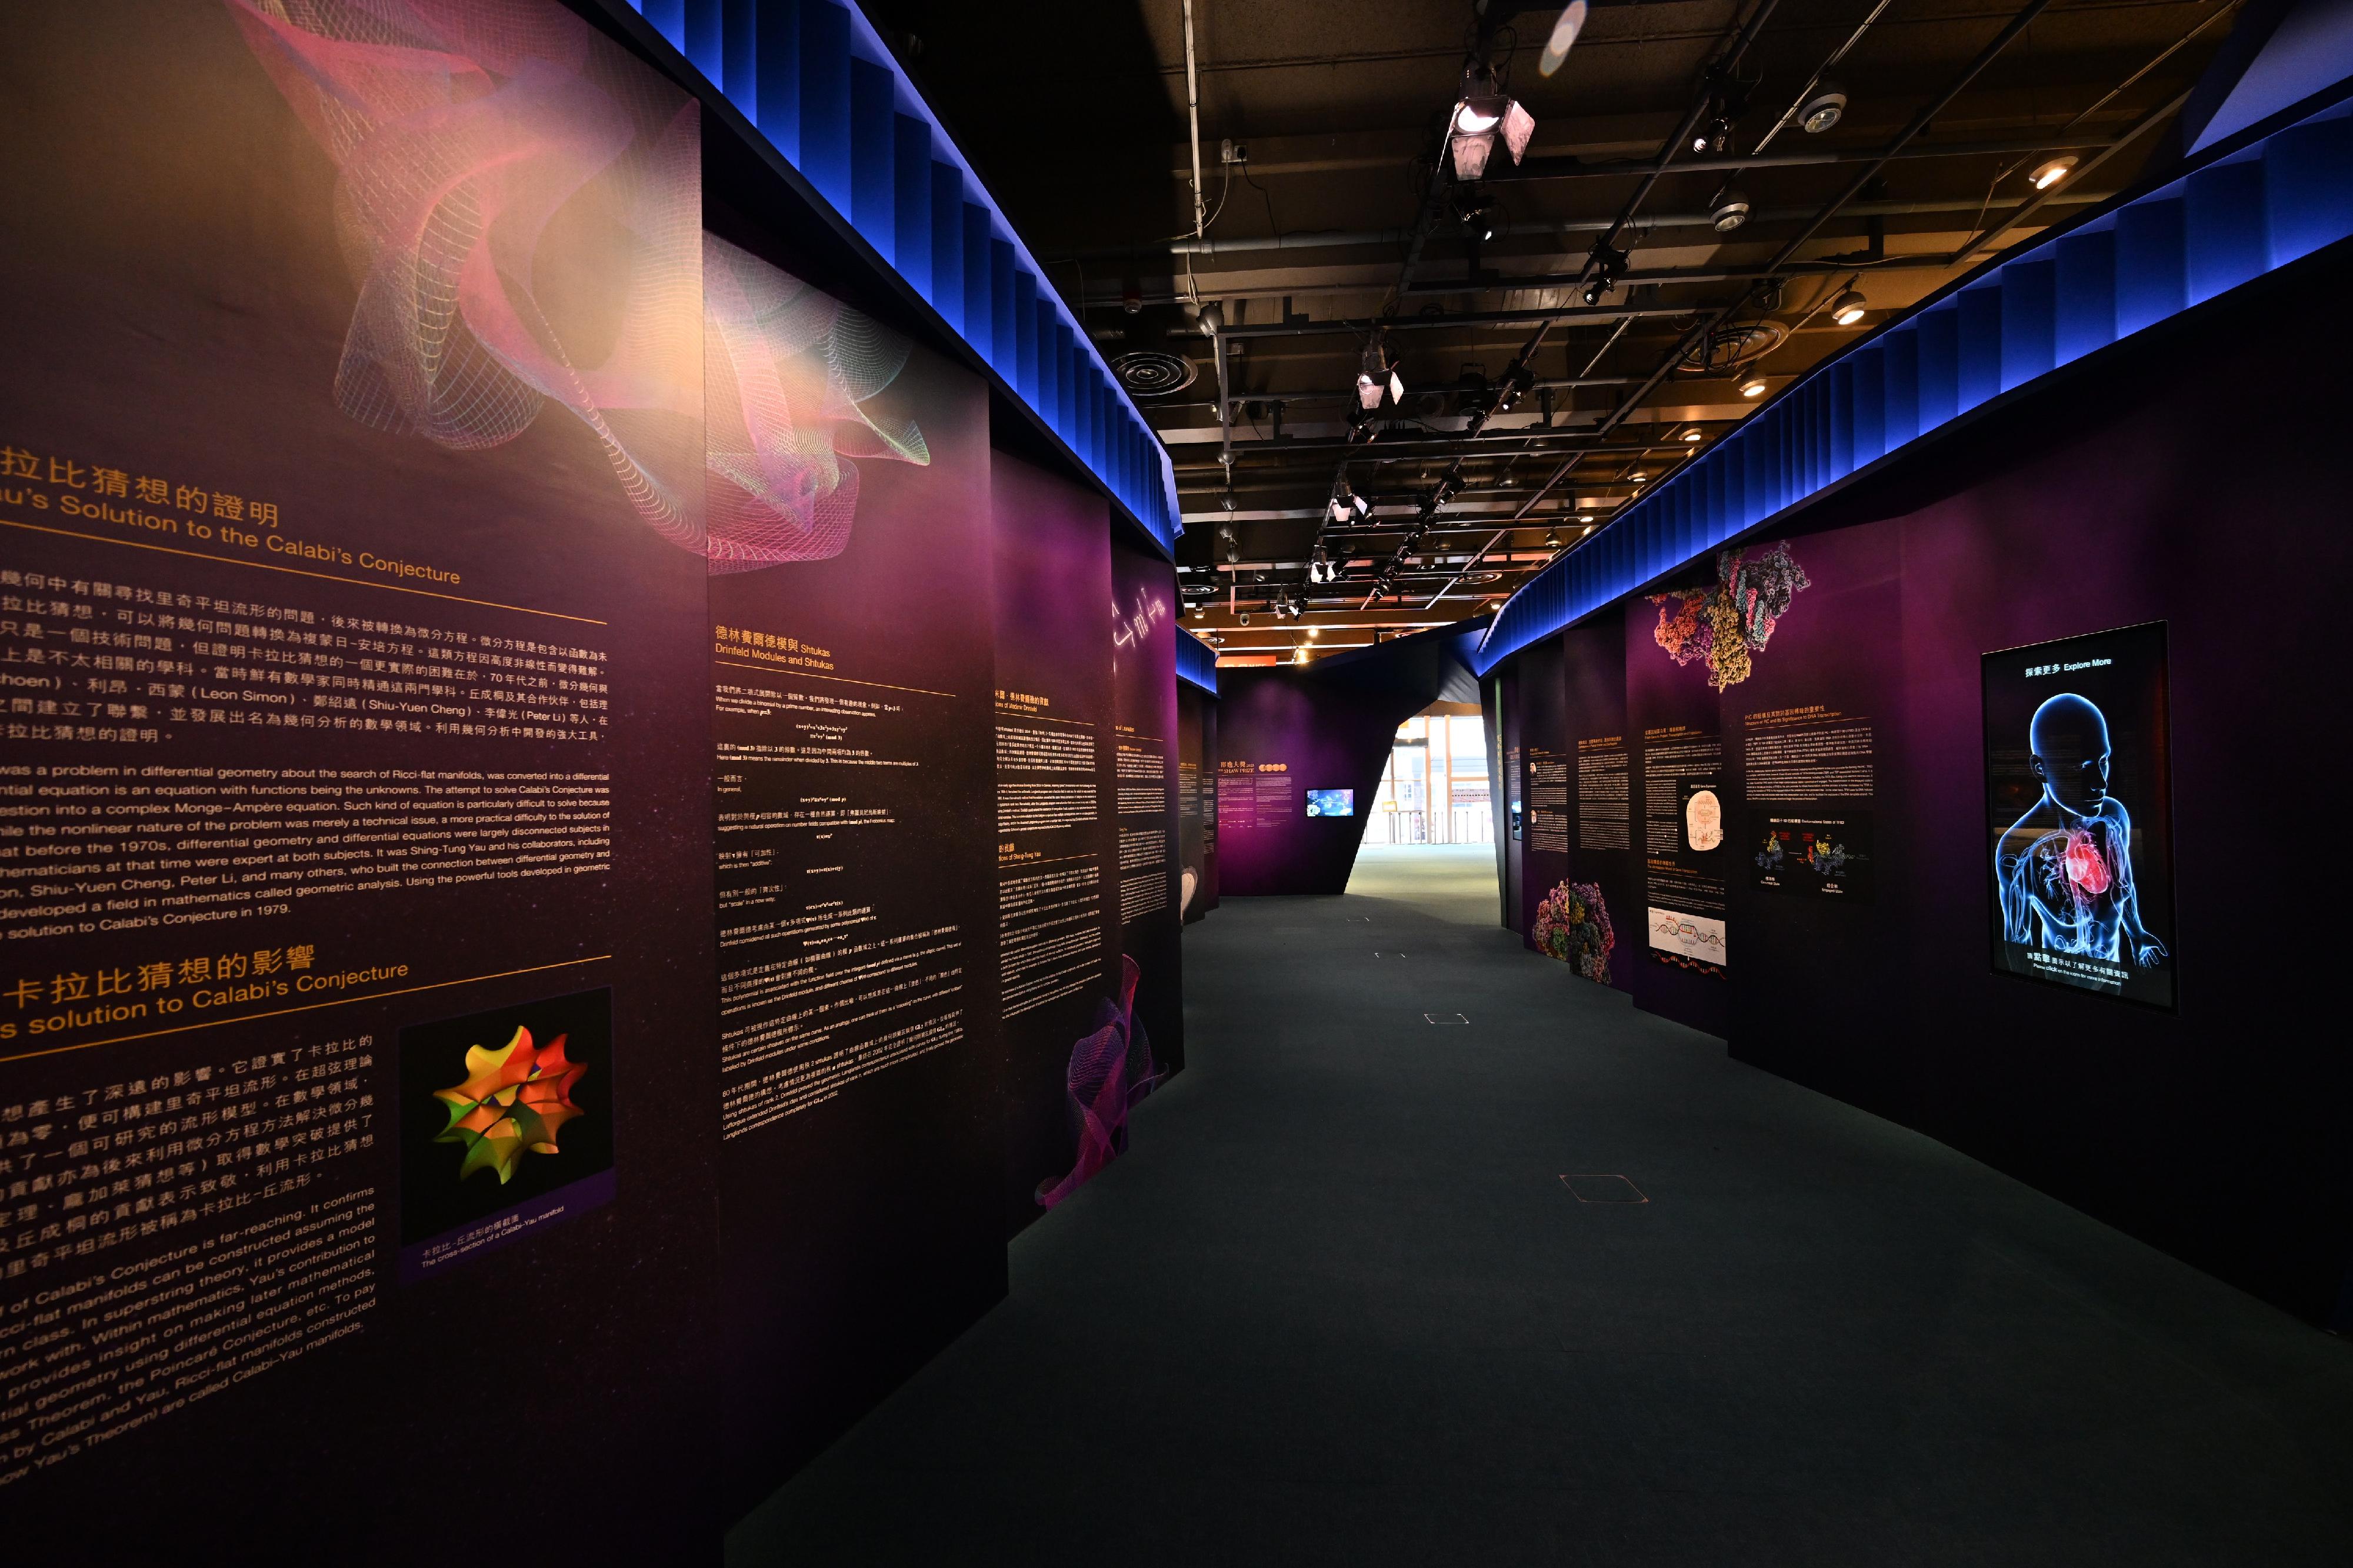 The Hong Kong Science Museum launched "The Shaw Prize 2023 Exhibition" today (November 10) to introduce the Shaw Laureates this year and their outstanding contributions, as well as basic science knowledge in the laureates' respective academic fields.